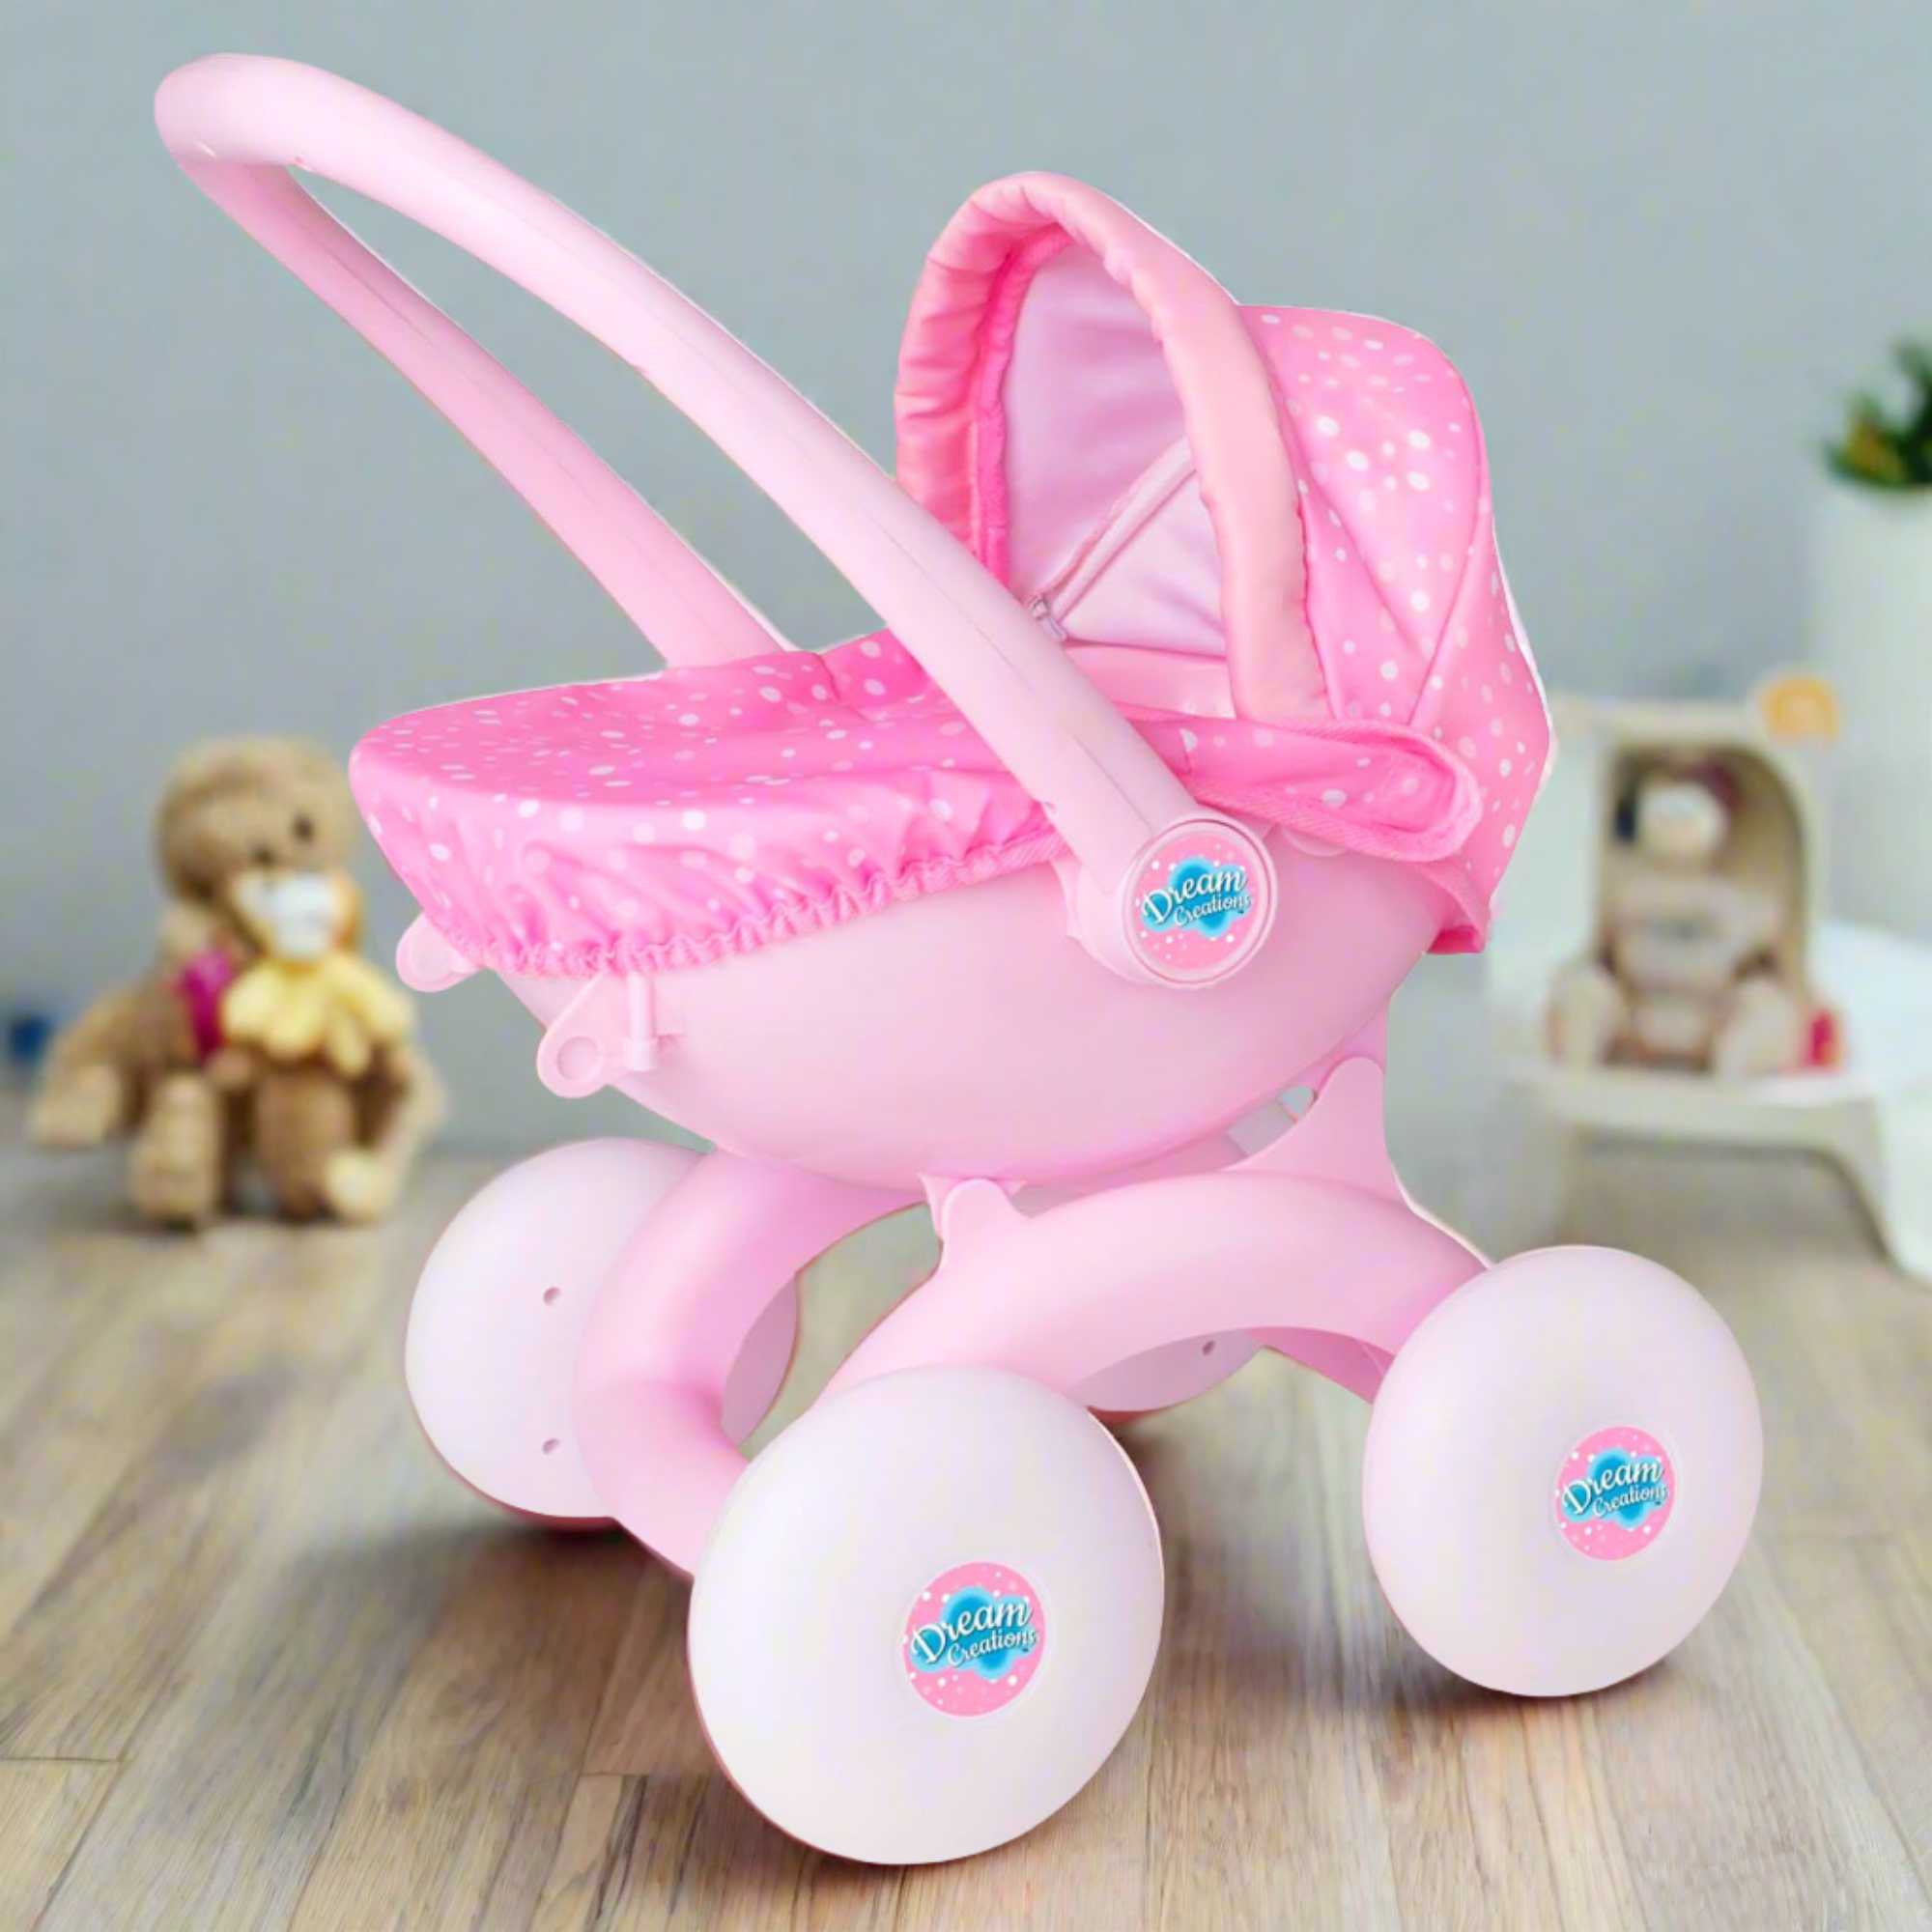 Dream Creations 4 in 1 My First Dolls Pram - Versatile and Stylish Toy Pram, Stroller, Carrycot, and Pushchair for Dolls